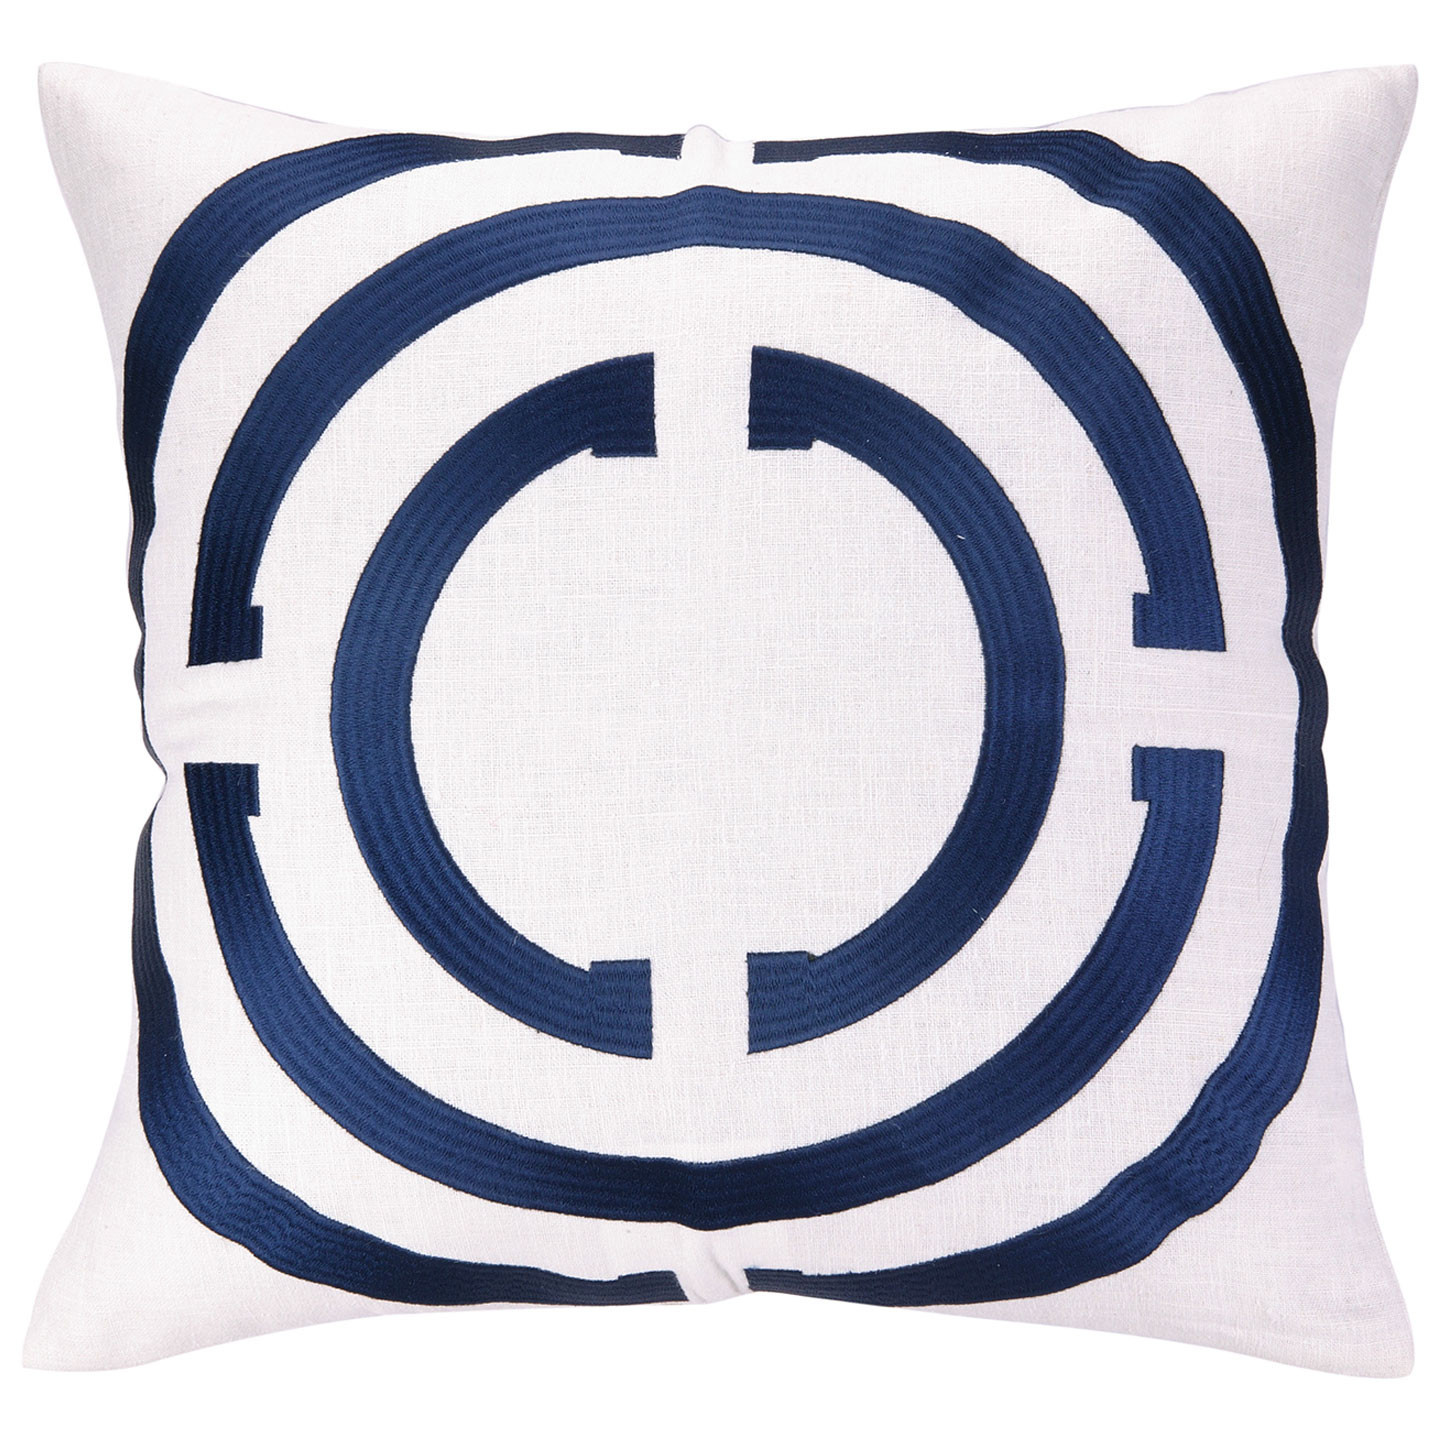 $120 Cococozy Light Pillow - Navy (above)